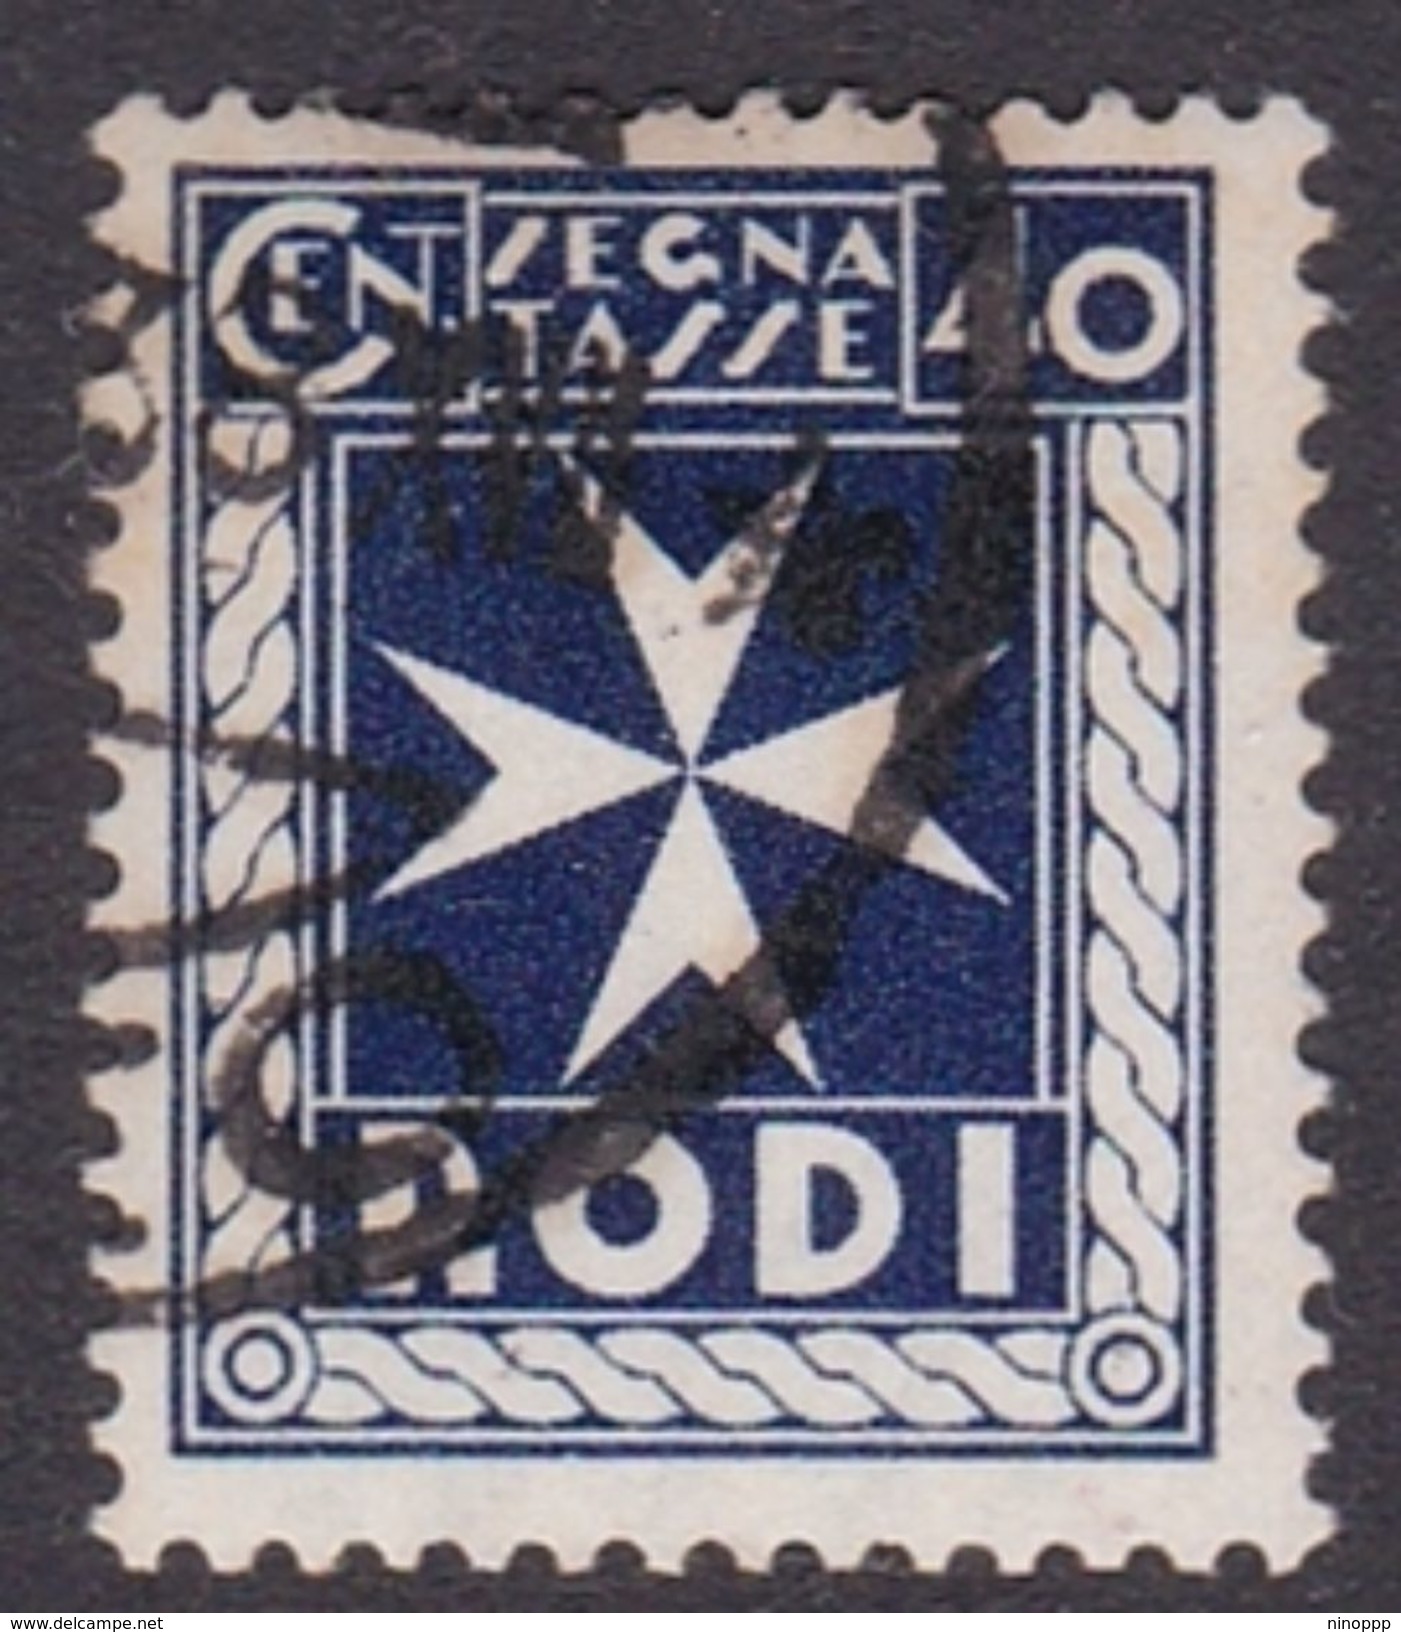 Italy-Colonies And Territories-Aegean General Issue-Rodi Postage Due D4 1934 30c Violet Used - Emissions Générales